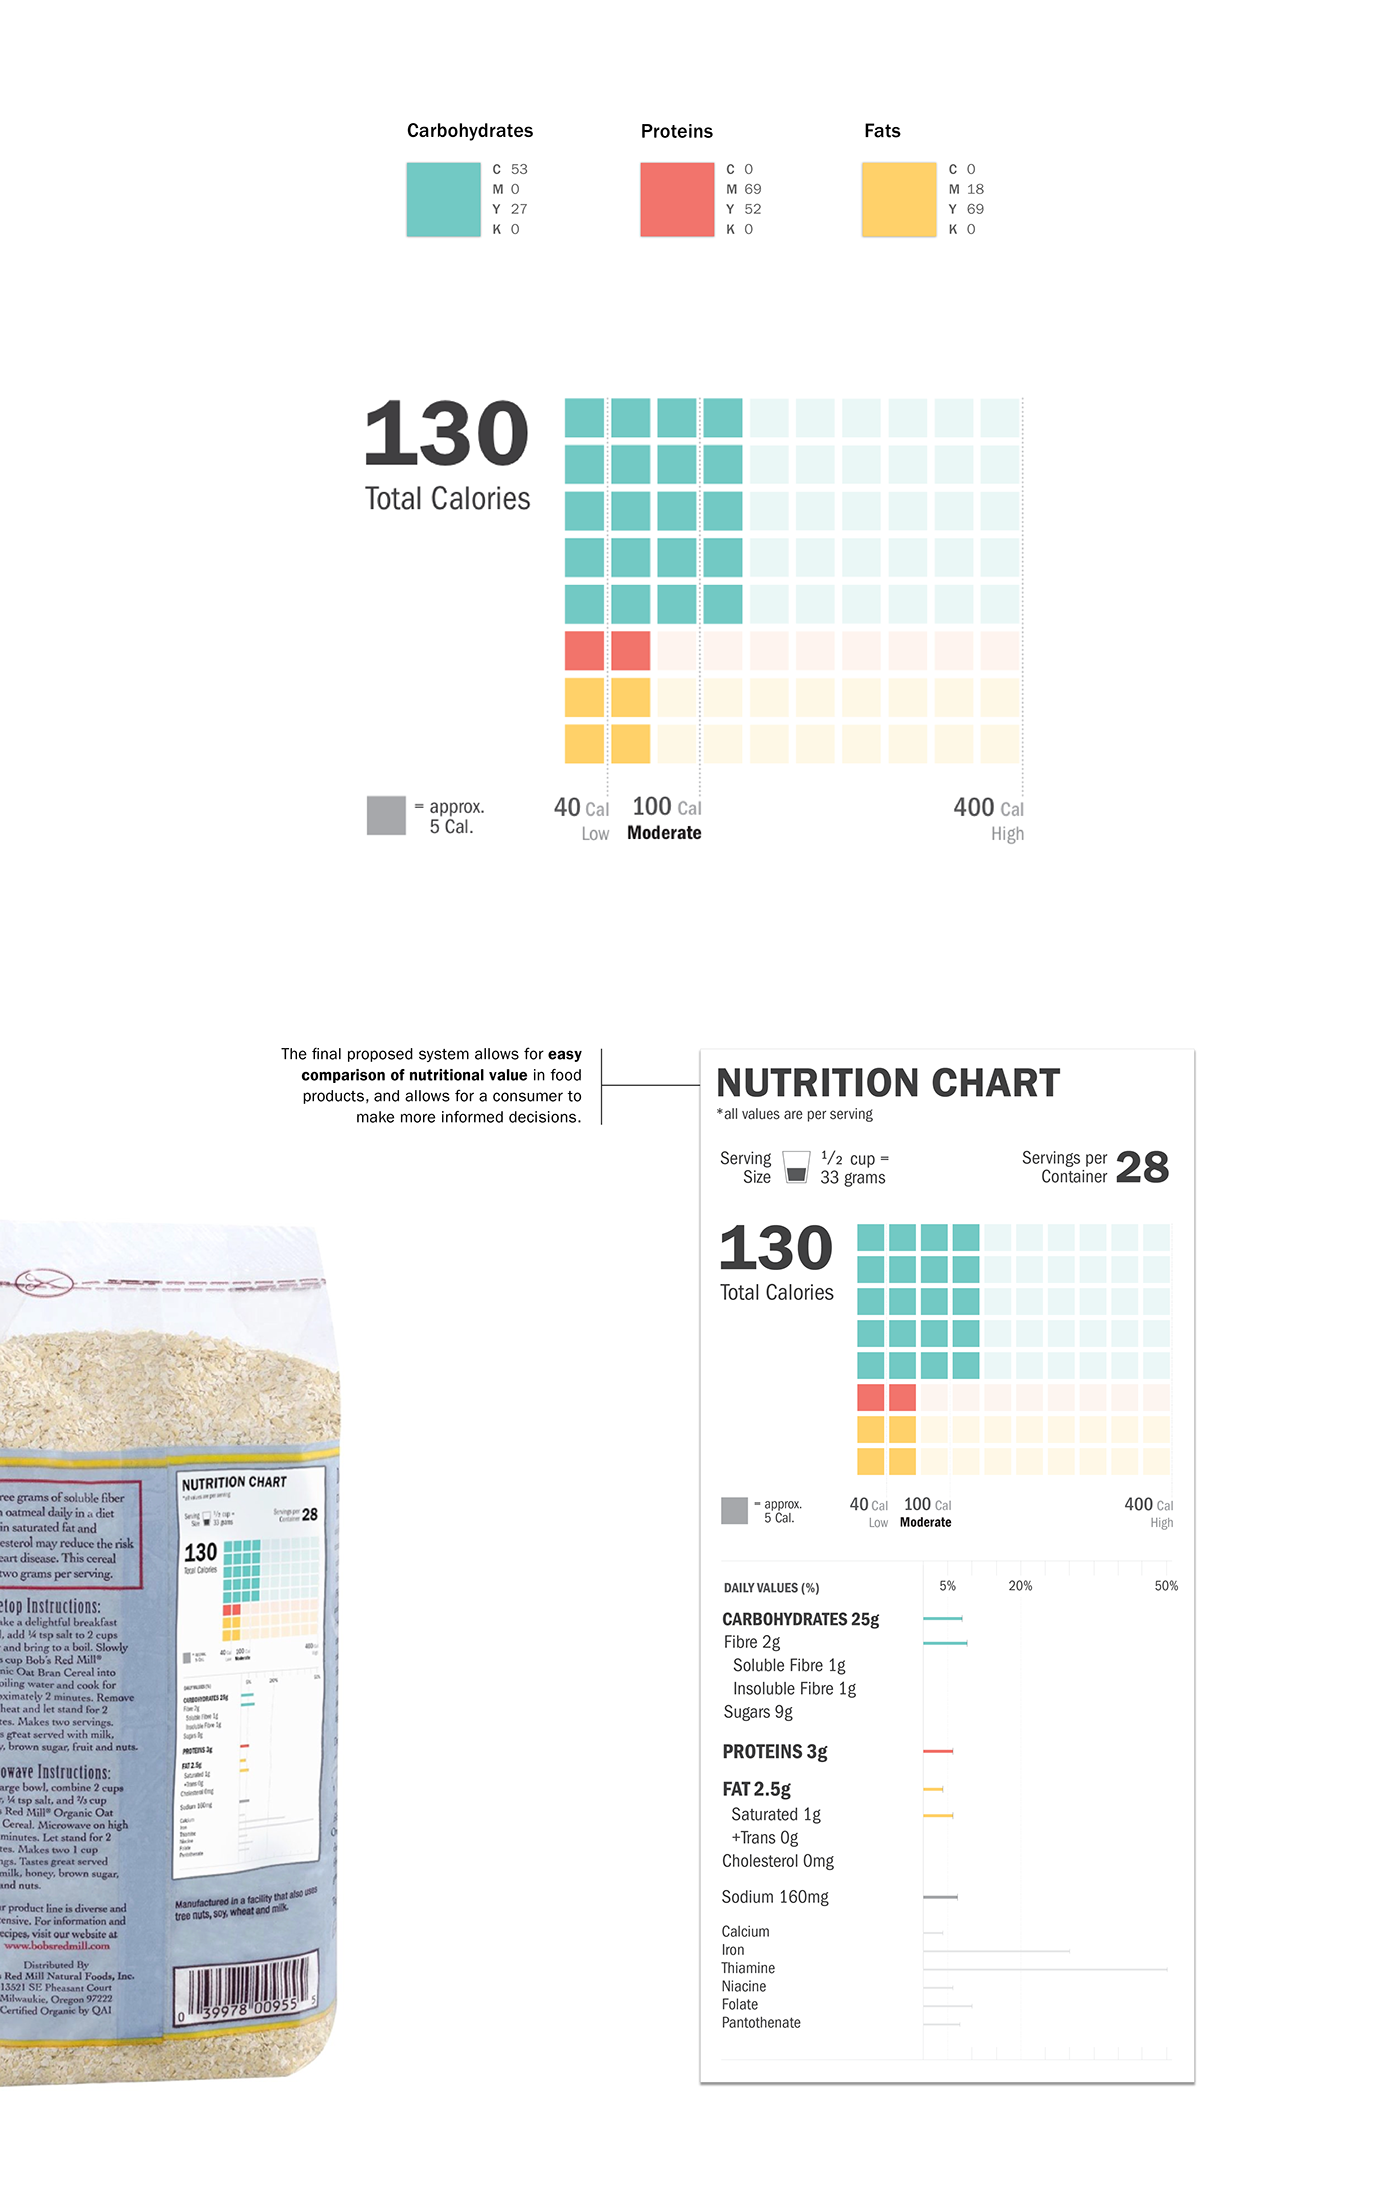 nutrition Label Packaging Health Food  data visualization data graphic information design colour healthy eating